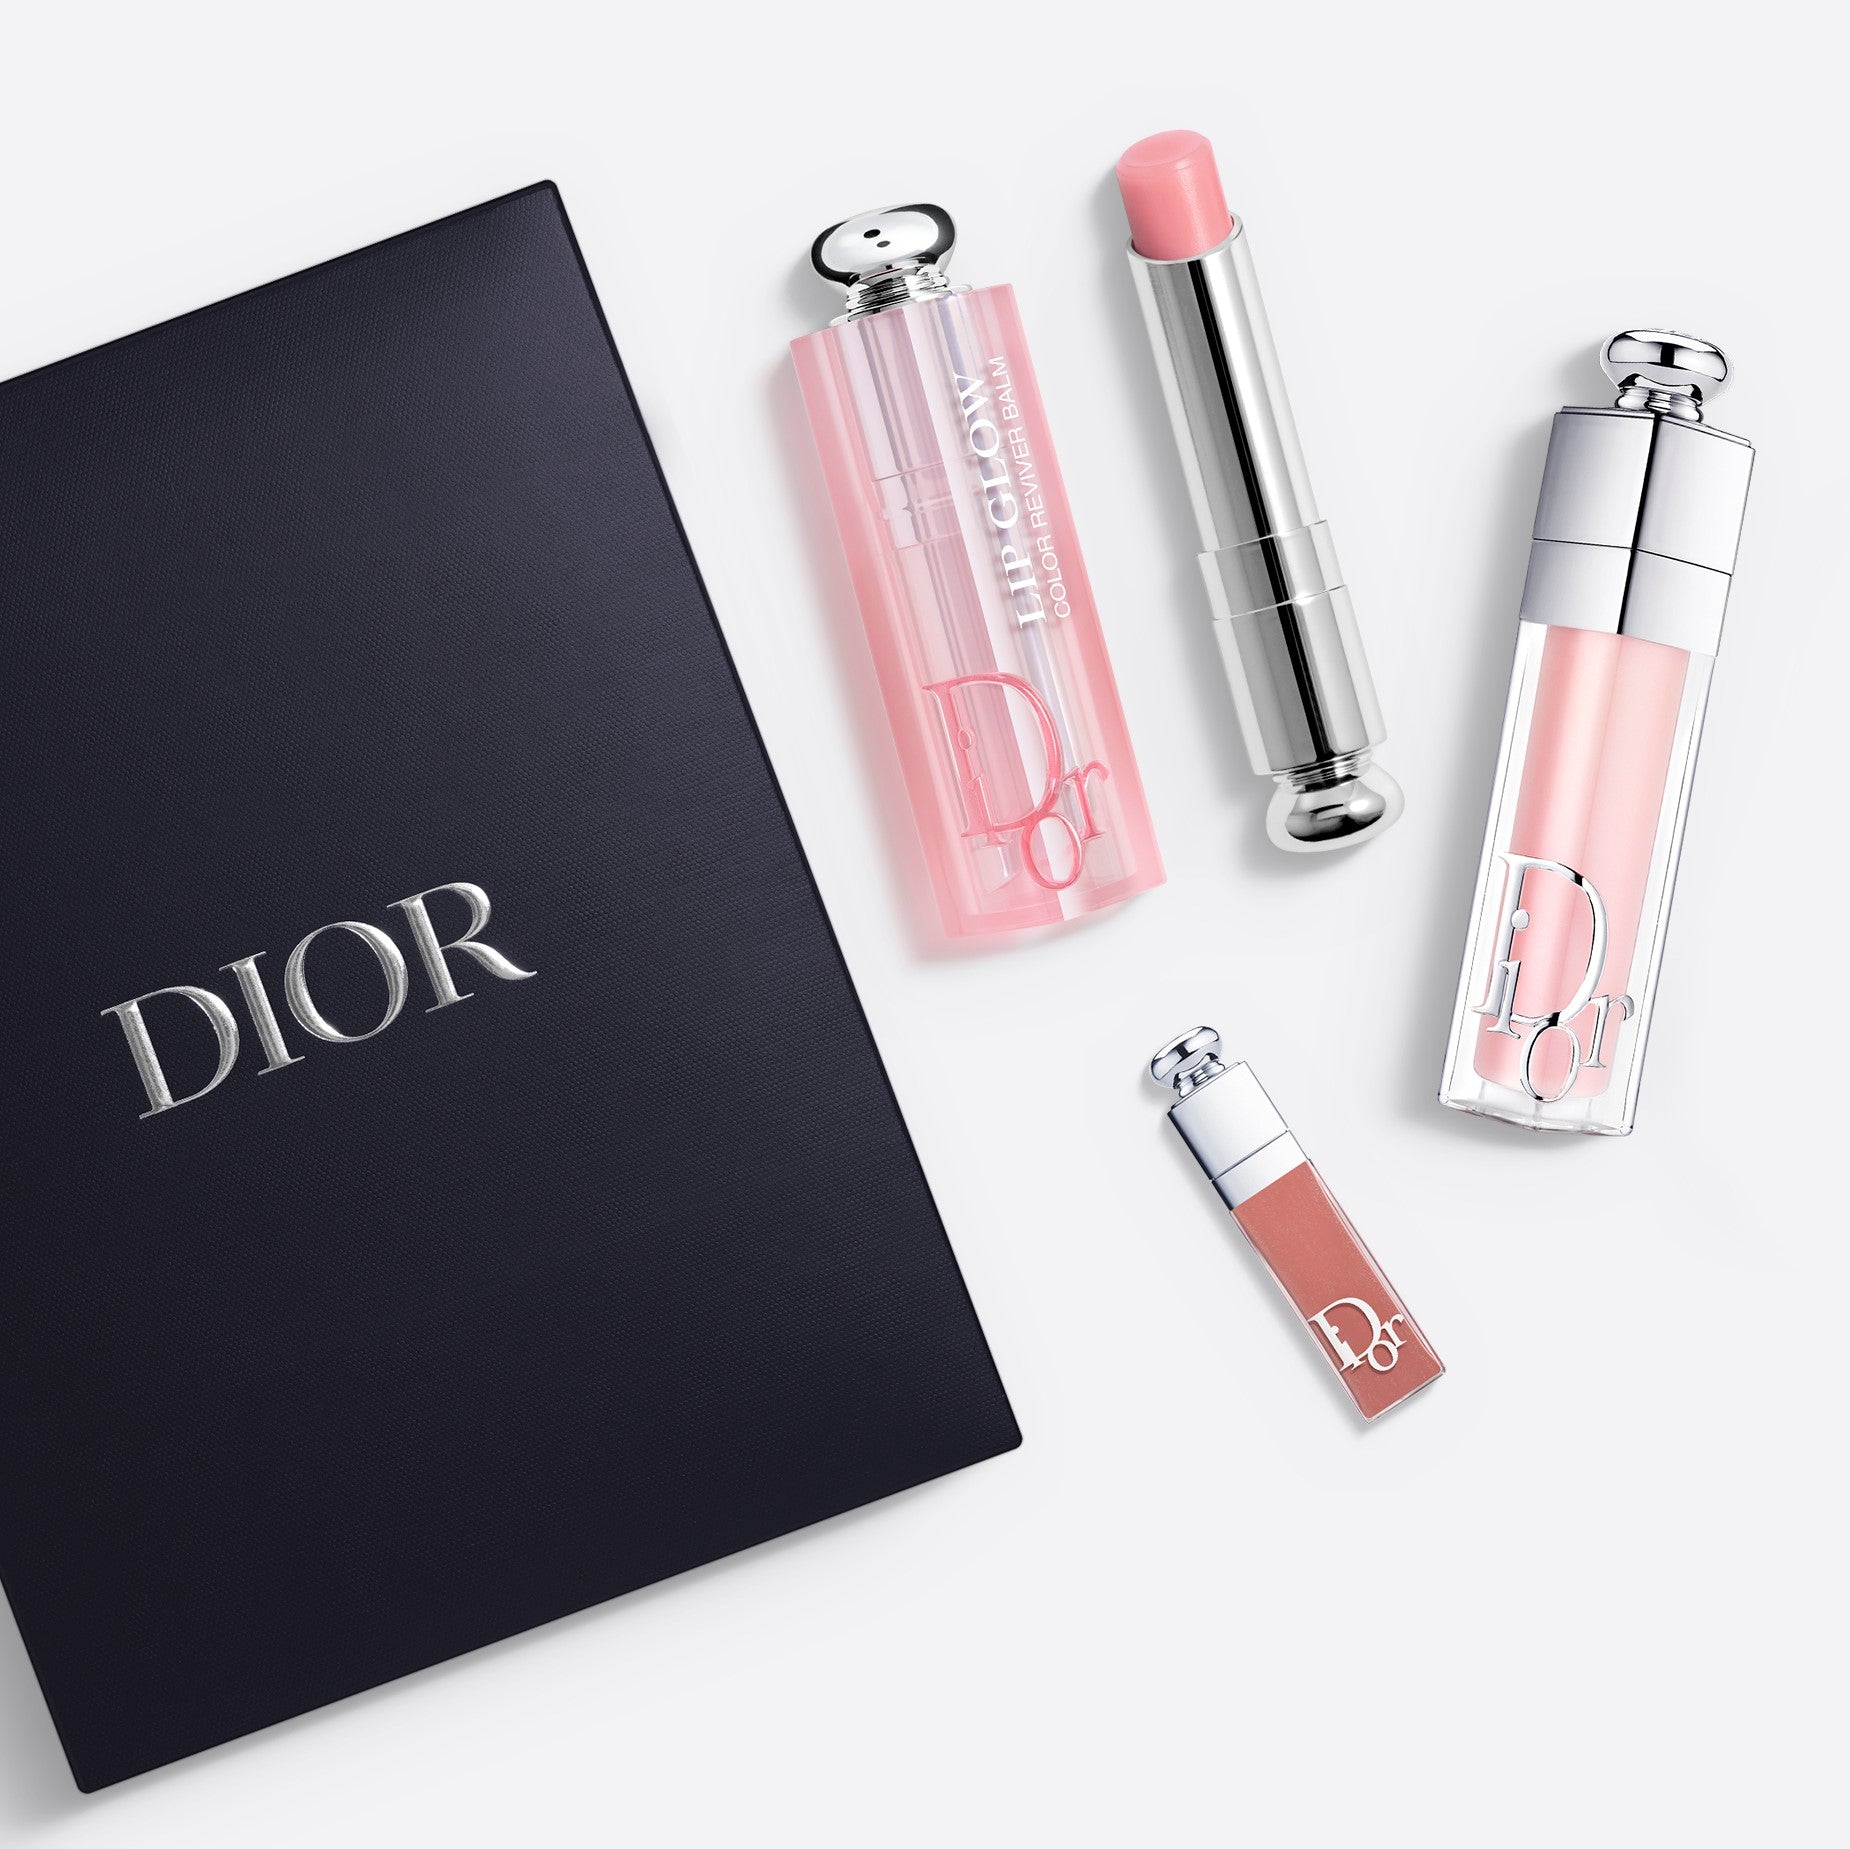 DIOR ADDICT NATURAL GLOW SET ~ Lip Balm and Plumping Gloss - 3 Products